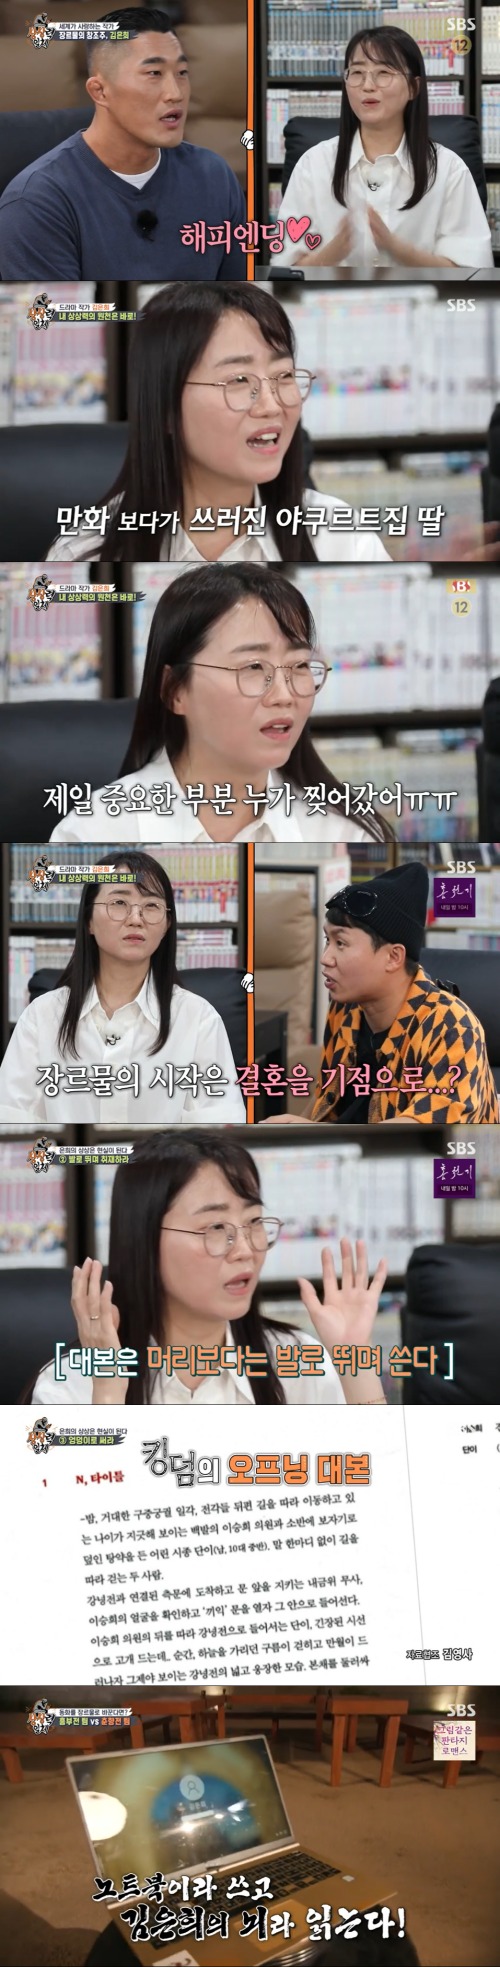 Seoul) = Kim Eun-hee emphasized feet and hips as a way to write a good script.On the 5th, SBS All The Butlers appeared in the drama writer Kim Eun-hee.When asked if Lee Seung-gi was appearing as Master, Jeon Seok-ho laughed, saying, Im not that good.Jeon Seok-ho said, I have a relationship with my master and have appeared as a daily student. Jeon Seok-ho said about the master, He makes imagination a reality.When Kim Eun-hee appeared on one side of the comic book room, everyone jumped up and greeted him.Lee Seung-gi told me to cast in the drama: Only Kim Dong-Hyun didnt know who he was, saying, What did you make?Kim Dong-Hyun was right to be Kim Eun-hee writer, but he did not know any works written by Kim Eun-hee.Kim Dong-Hyun said only dokkaebi, Couple of Paris and Dawn of the Sun made by Kim Eun-sook.Kim Eun-hee said, I am close to Kim Eun-sook who wrote it.Kim Eun-hee said: Ive fallen in a comic book room.After the test, I came to the comic book and went to the cartoon and went to 119.  At that time, the president of the comic book is now doing a tteokbokki shop.Kim Eun-hee said that the cartoon that I saw at that time had a lot of influence on my life.Yang Se-hyeong quoted Jang Hang-jun as saying, Is Jang Hang-jun a great inspiration for Kim Eun-hees imagination?Kim Eun-hee laughed when Jang Hang-jun revealed that it was alcohol that influenced his imagination.Kim Eun-hee said, Ive never seen anyone who writes and does not read books like that. The book in the library is a book that Jang Hang-jun read before marriage.It is now the The Cost of Genre Animals, but when I was a child, I surprisingly liked genuine cartoons.Kim Eun-hee said, The first thing that was annoying was that the next scene was a kissing god, and it was when someone cut it.There are few kissing gods in Kim Eun-hees work; Kim Eun-hee said, Kissing is ambiguous to enter.I have to feel that way, but I want to write it, but I can not write it well. Yang Se-hyeong originally liked genuine comics and melodies, but asked if he started writing Genre Animals from marriage.Kim Eun-hee was worried and said, I think it is right to marry. Jang Hang-jun is the inspiration.Kim Eun-hee said that when writing a script, he met a lot of experts and surveyed the data. It is his principle to write a script, not a head.Yang Se-hyeong, unlike the slow foreign Zombie 2: The Dead are Among Us films, is a Korean Zombie 2: The Dead are Among Us film, especially the Zombie 2: The Dead are Among Us of Kim Eun-hee films, which run fast I asked what I thought when it was unique.Kim Eun-hee said that Zombie 2: The Dead are Among Us would be very hungry, and that the starving people of the Joseon Dynasty had a historical record of eating even their children who died of illness, so they made a different Zombie 2: The Dead are Among Us based on this.Once we have finished the research, we will sit for a long time and fix it several times, said Jeon Seok-ho, Kim Eun-hees script is very specific.I thought it was a novel. It is a Genre animal specialization that I think about murder in a comic book room, but it is surprisingly scary.Kim Eun-hee said that because of the fear, he can write scary scenes well.